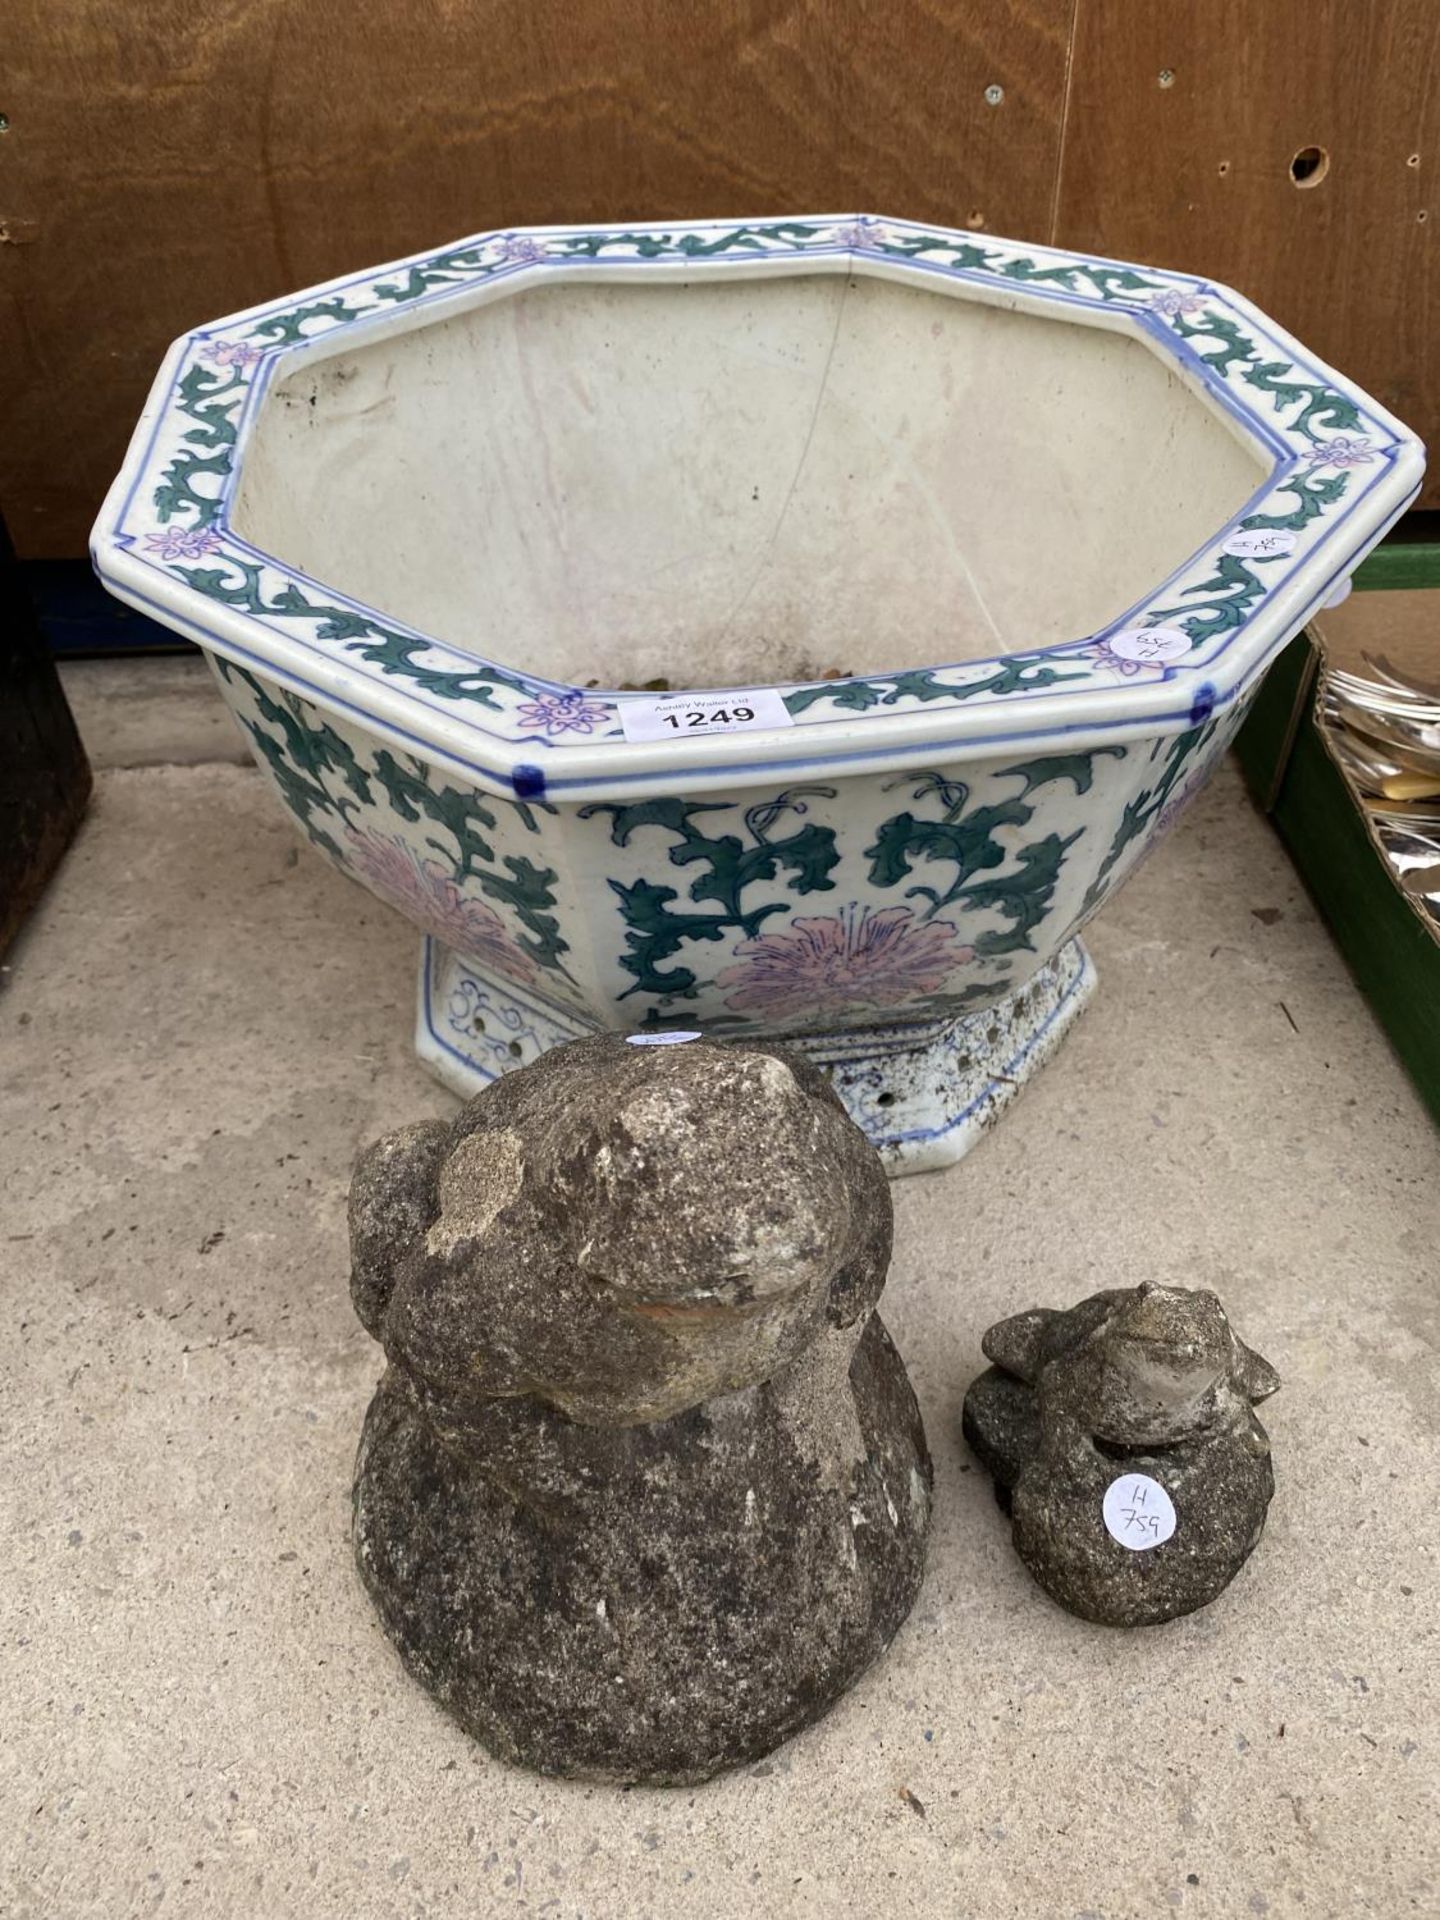 A DECORATIVE OCTAGONAL CERAMIC PLANTER AND TWO RECONSTITUTED STONE FROG GARDEN ORNAMENTS